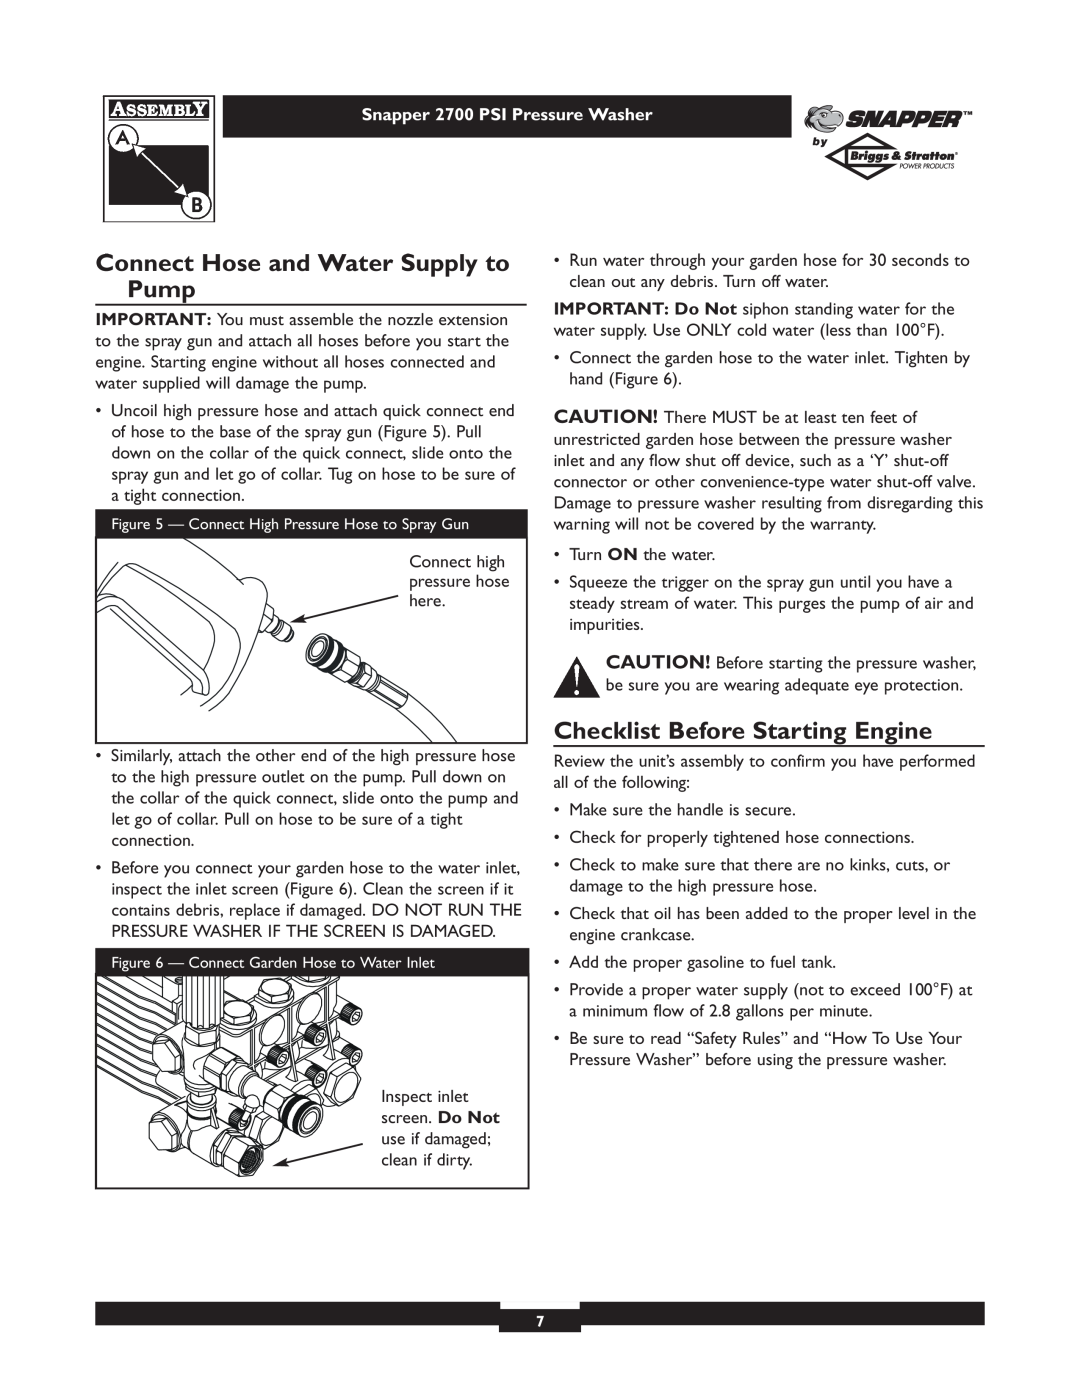 Briggs & Stratton 2700PSI owner manual Connect Hose and Water Supply to Pump, Checklist Before Starting Engine 